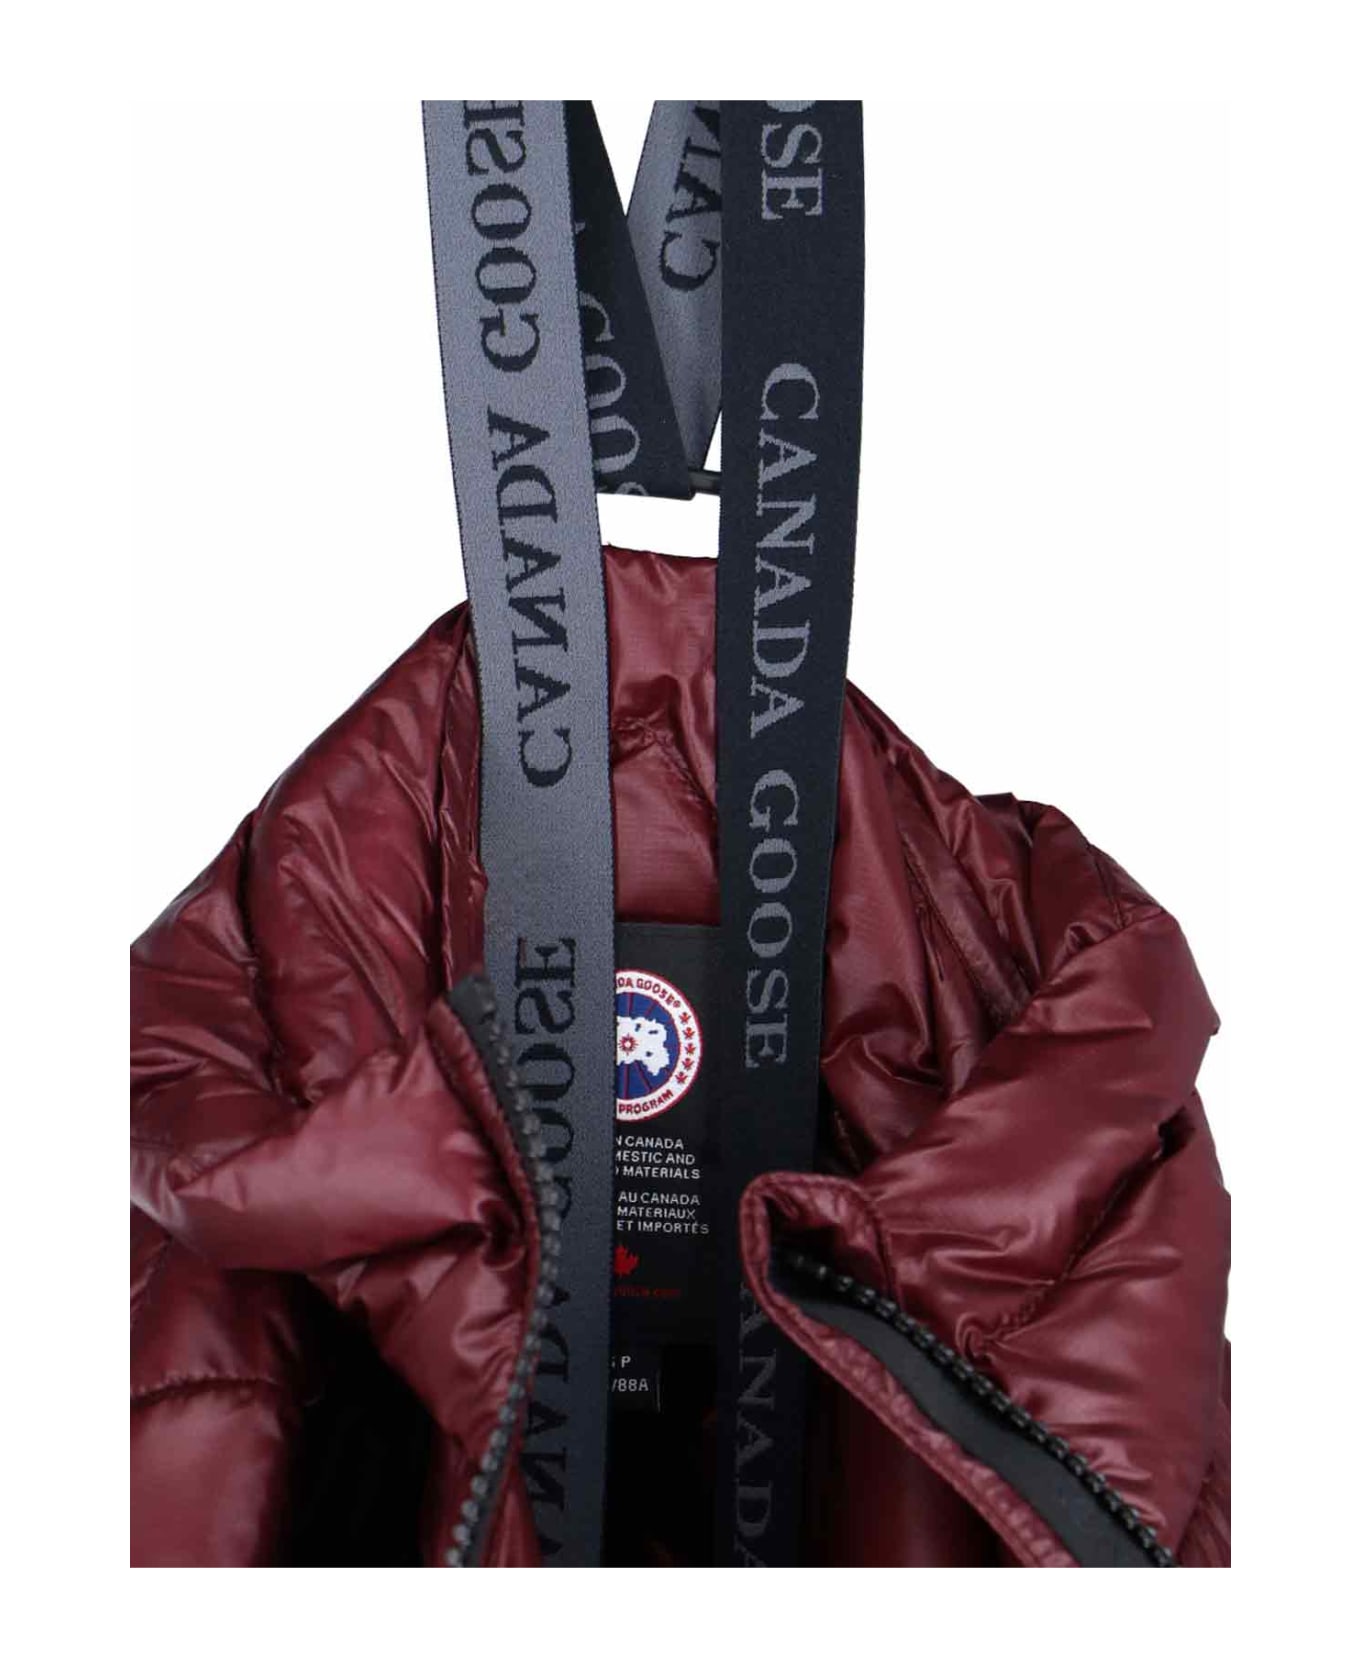 Canada Goose Jacket - Red